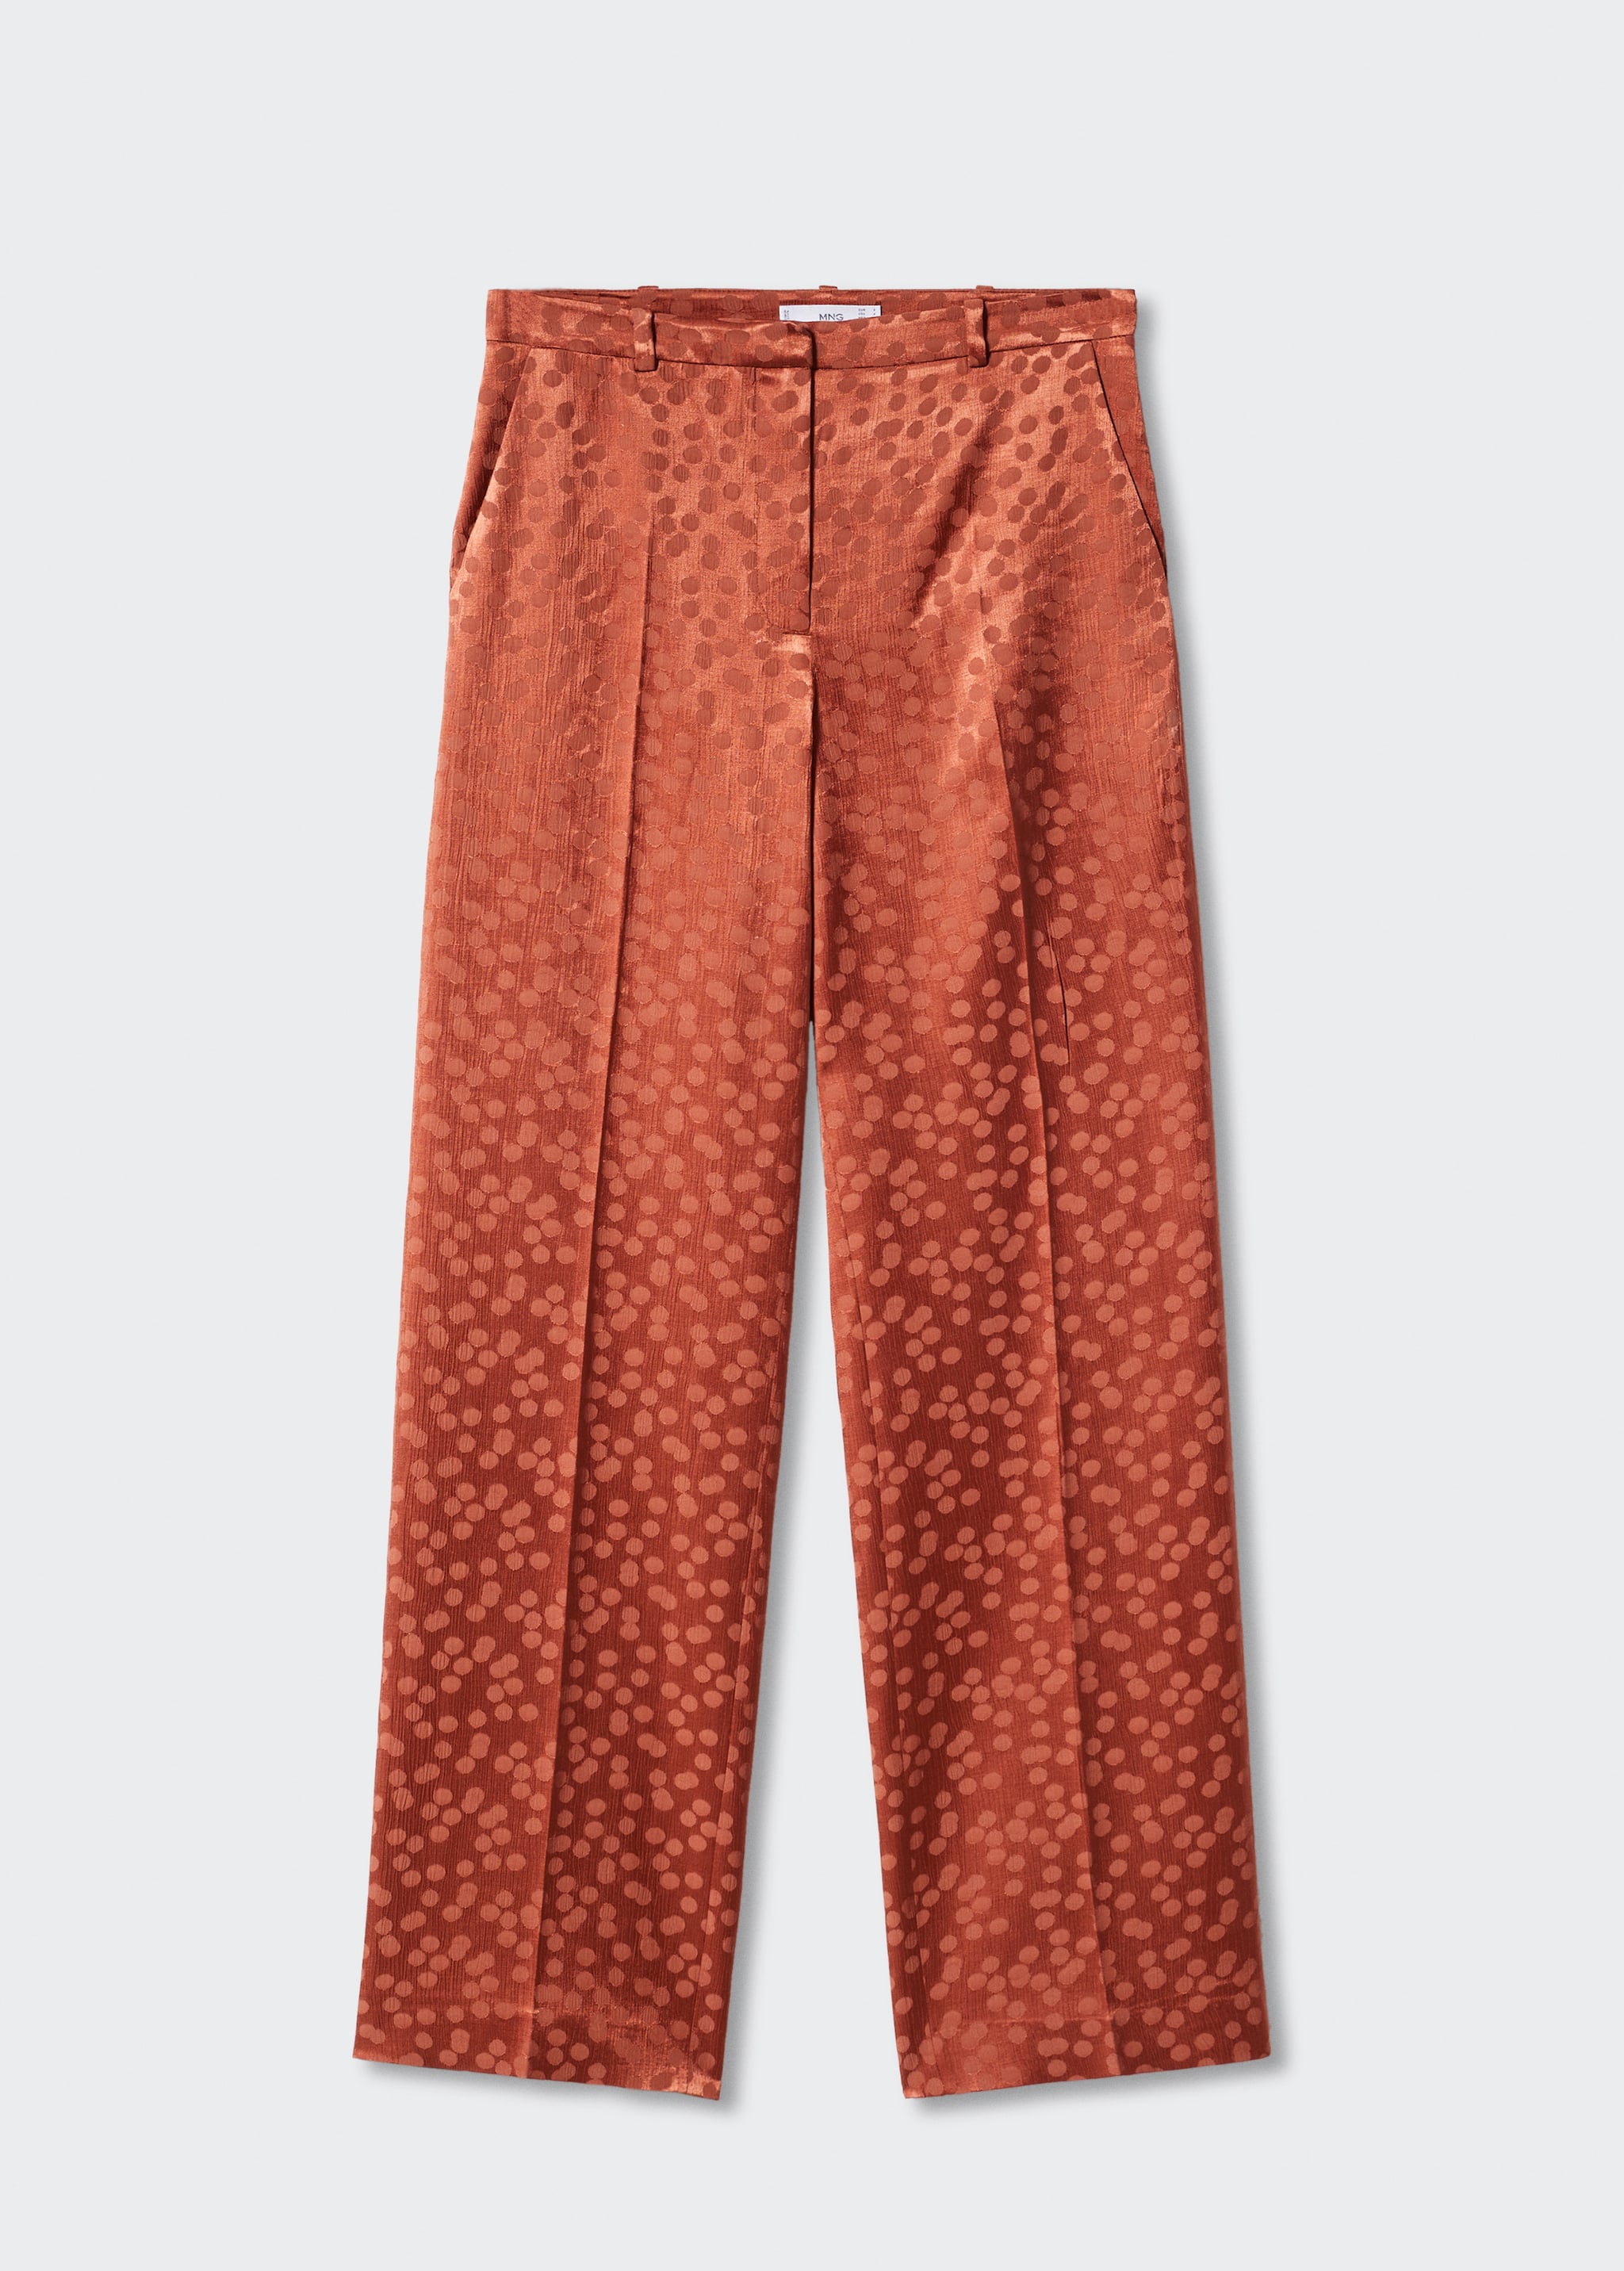 Satin trousers with polka dots - Article without model